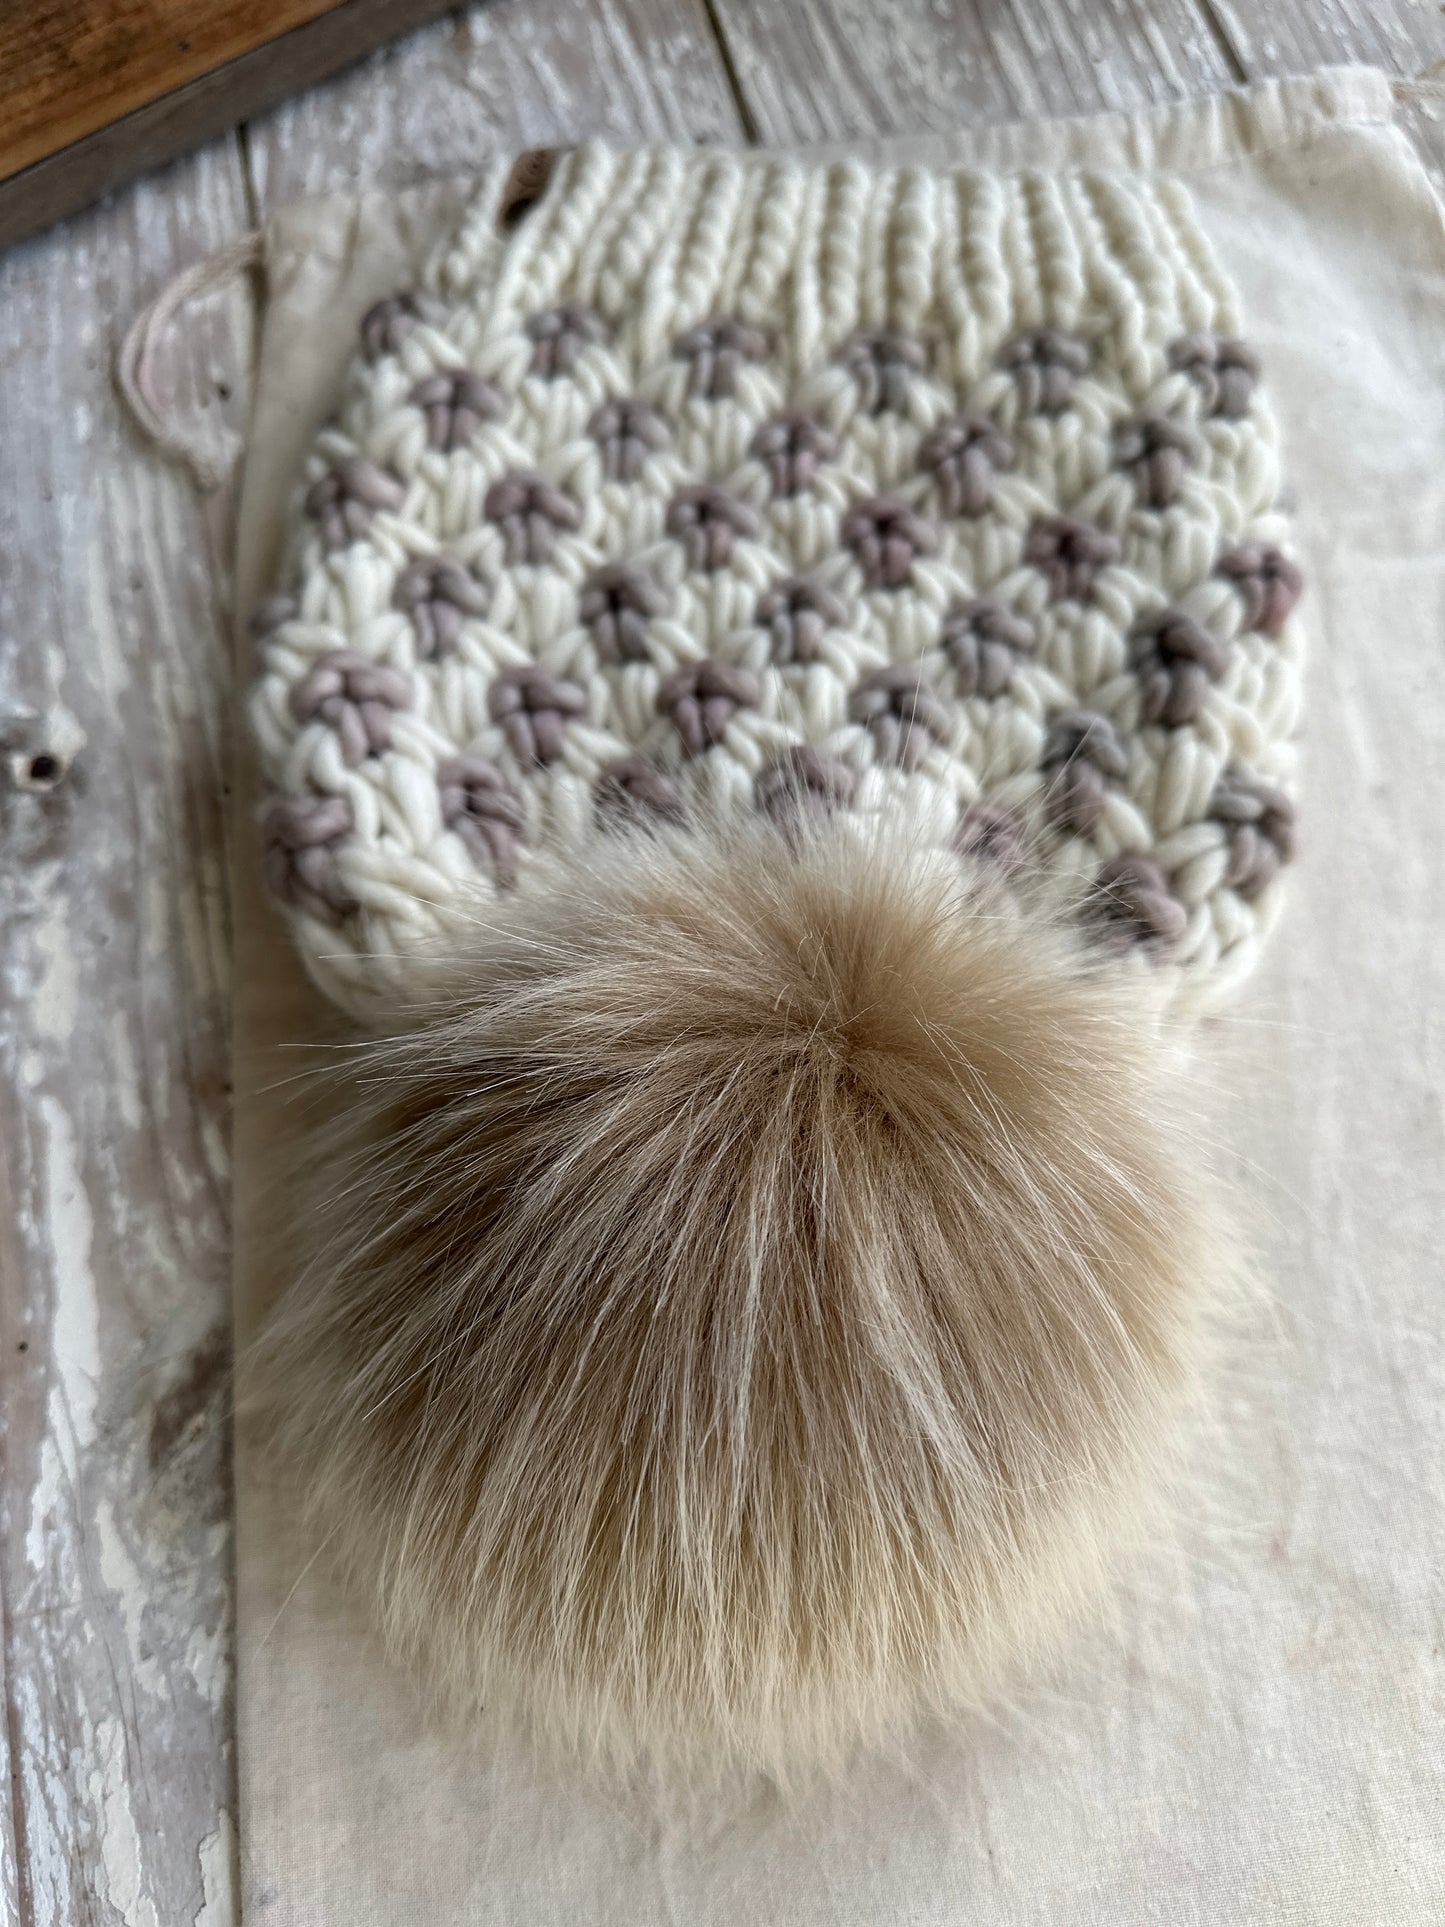 Reserved for Erin- merino wool knit hat and cowl set